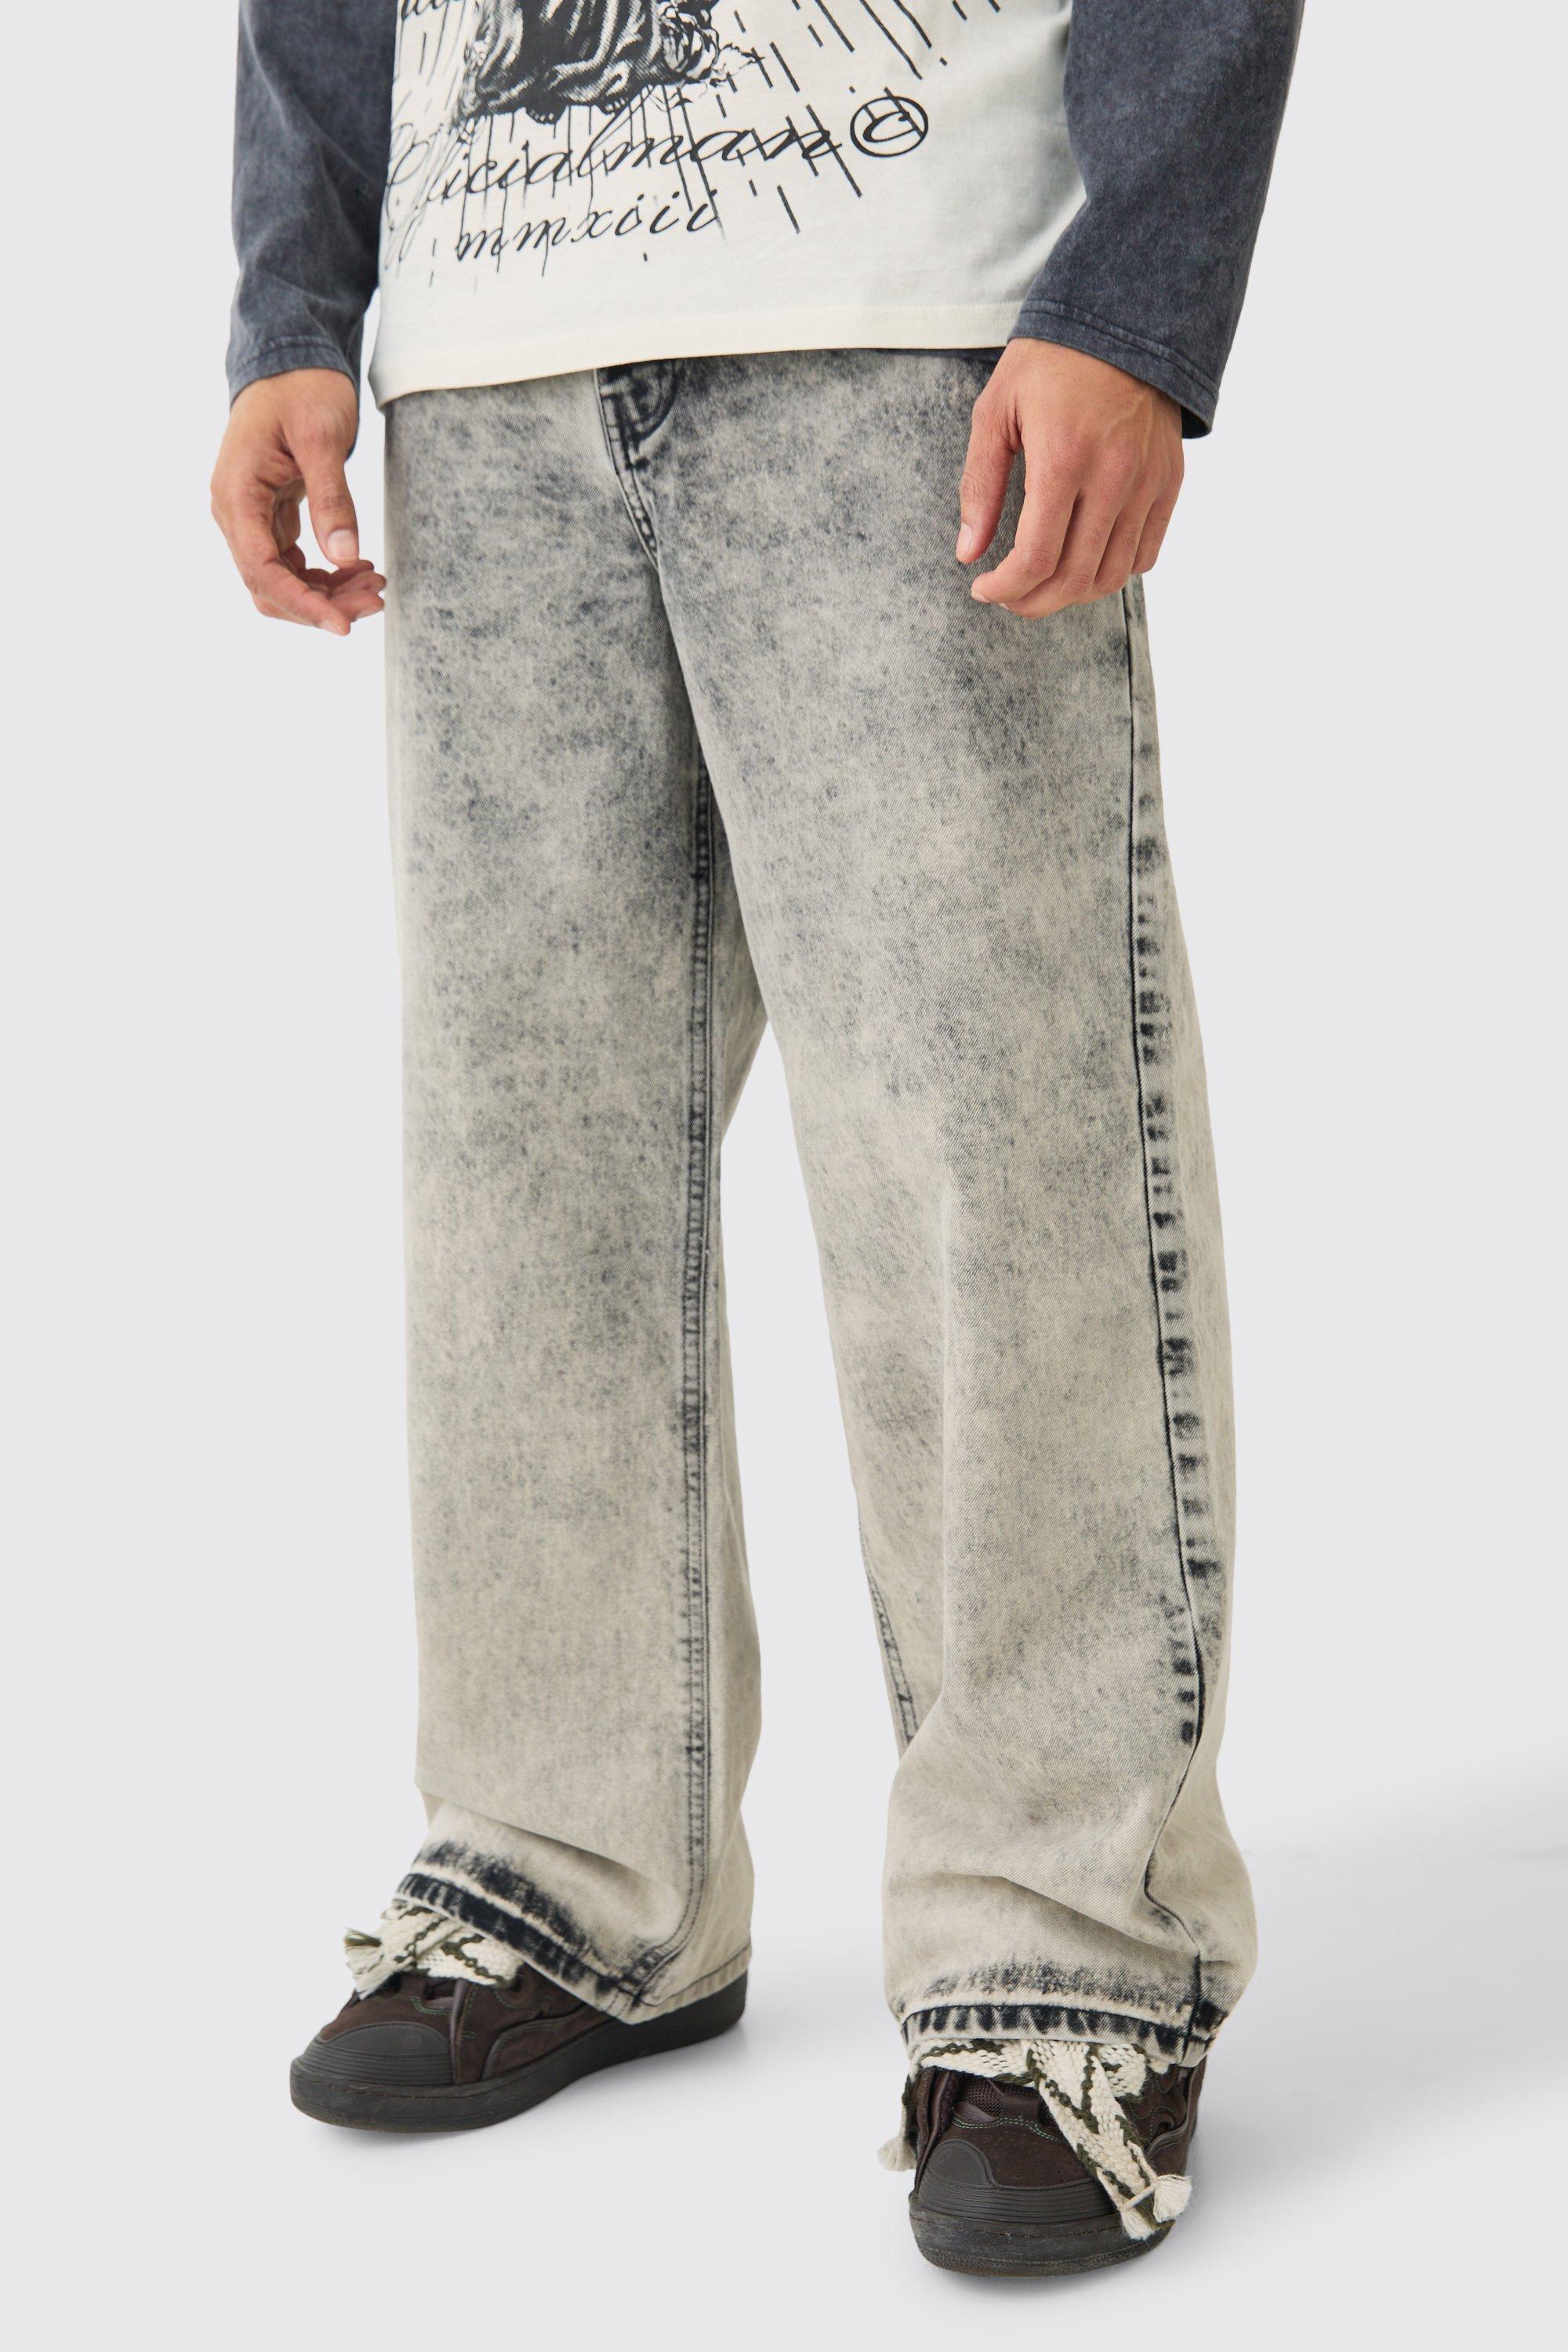 Image of Extreme Baggy Rigid Acid Wash Jeans In Charcoal, Grigio